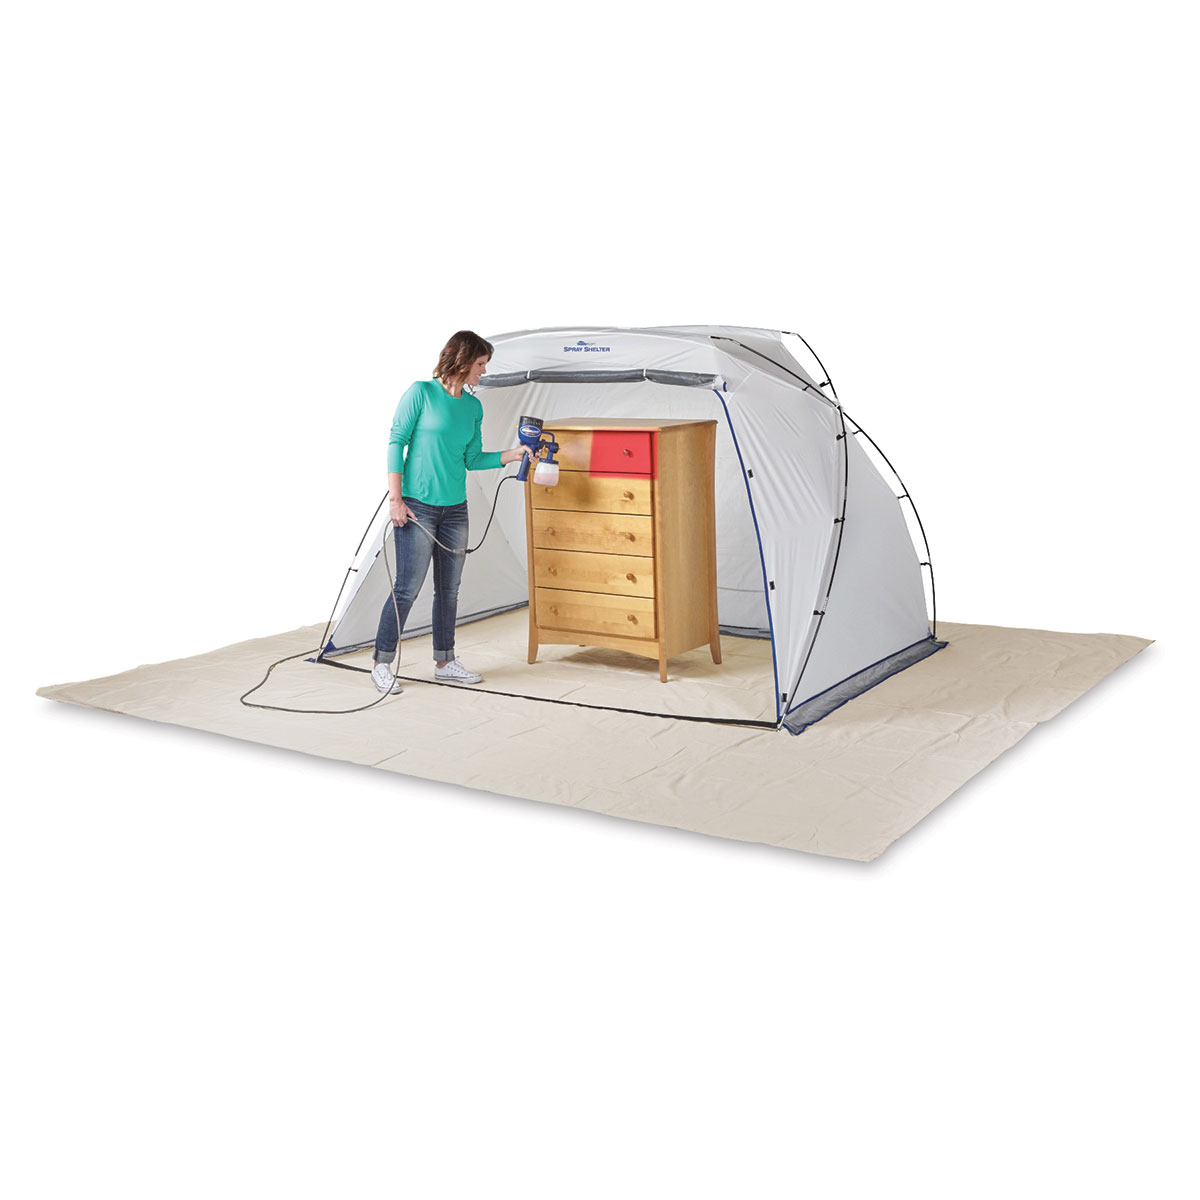 Large Spray Shelter C900038 Portable Paint Booth,Spray Paint Tent